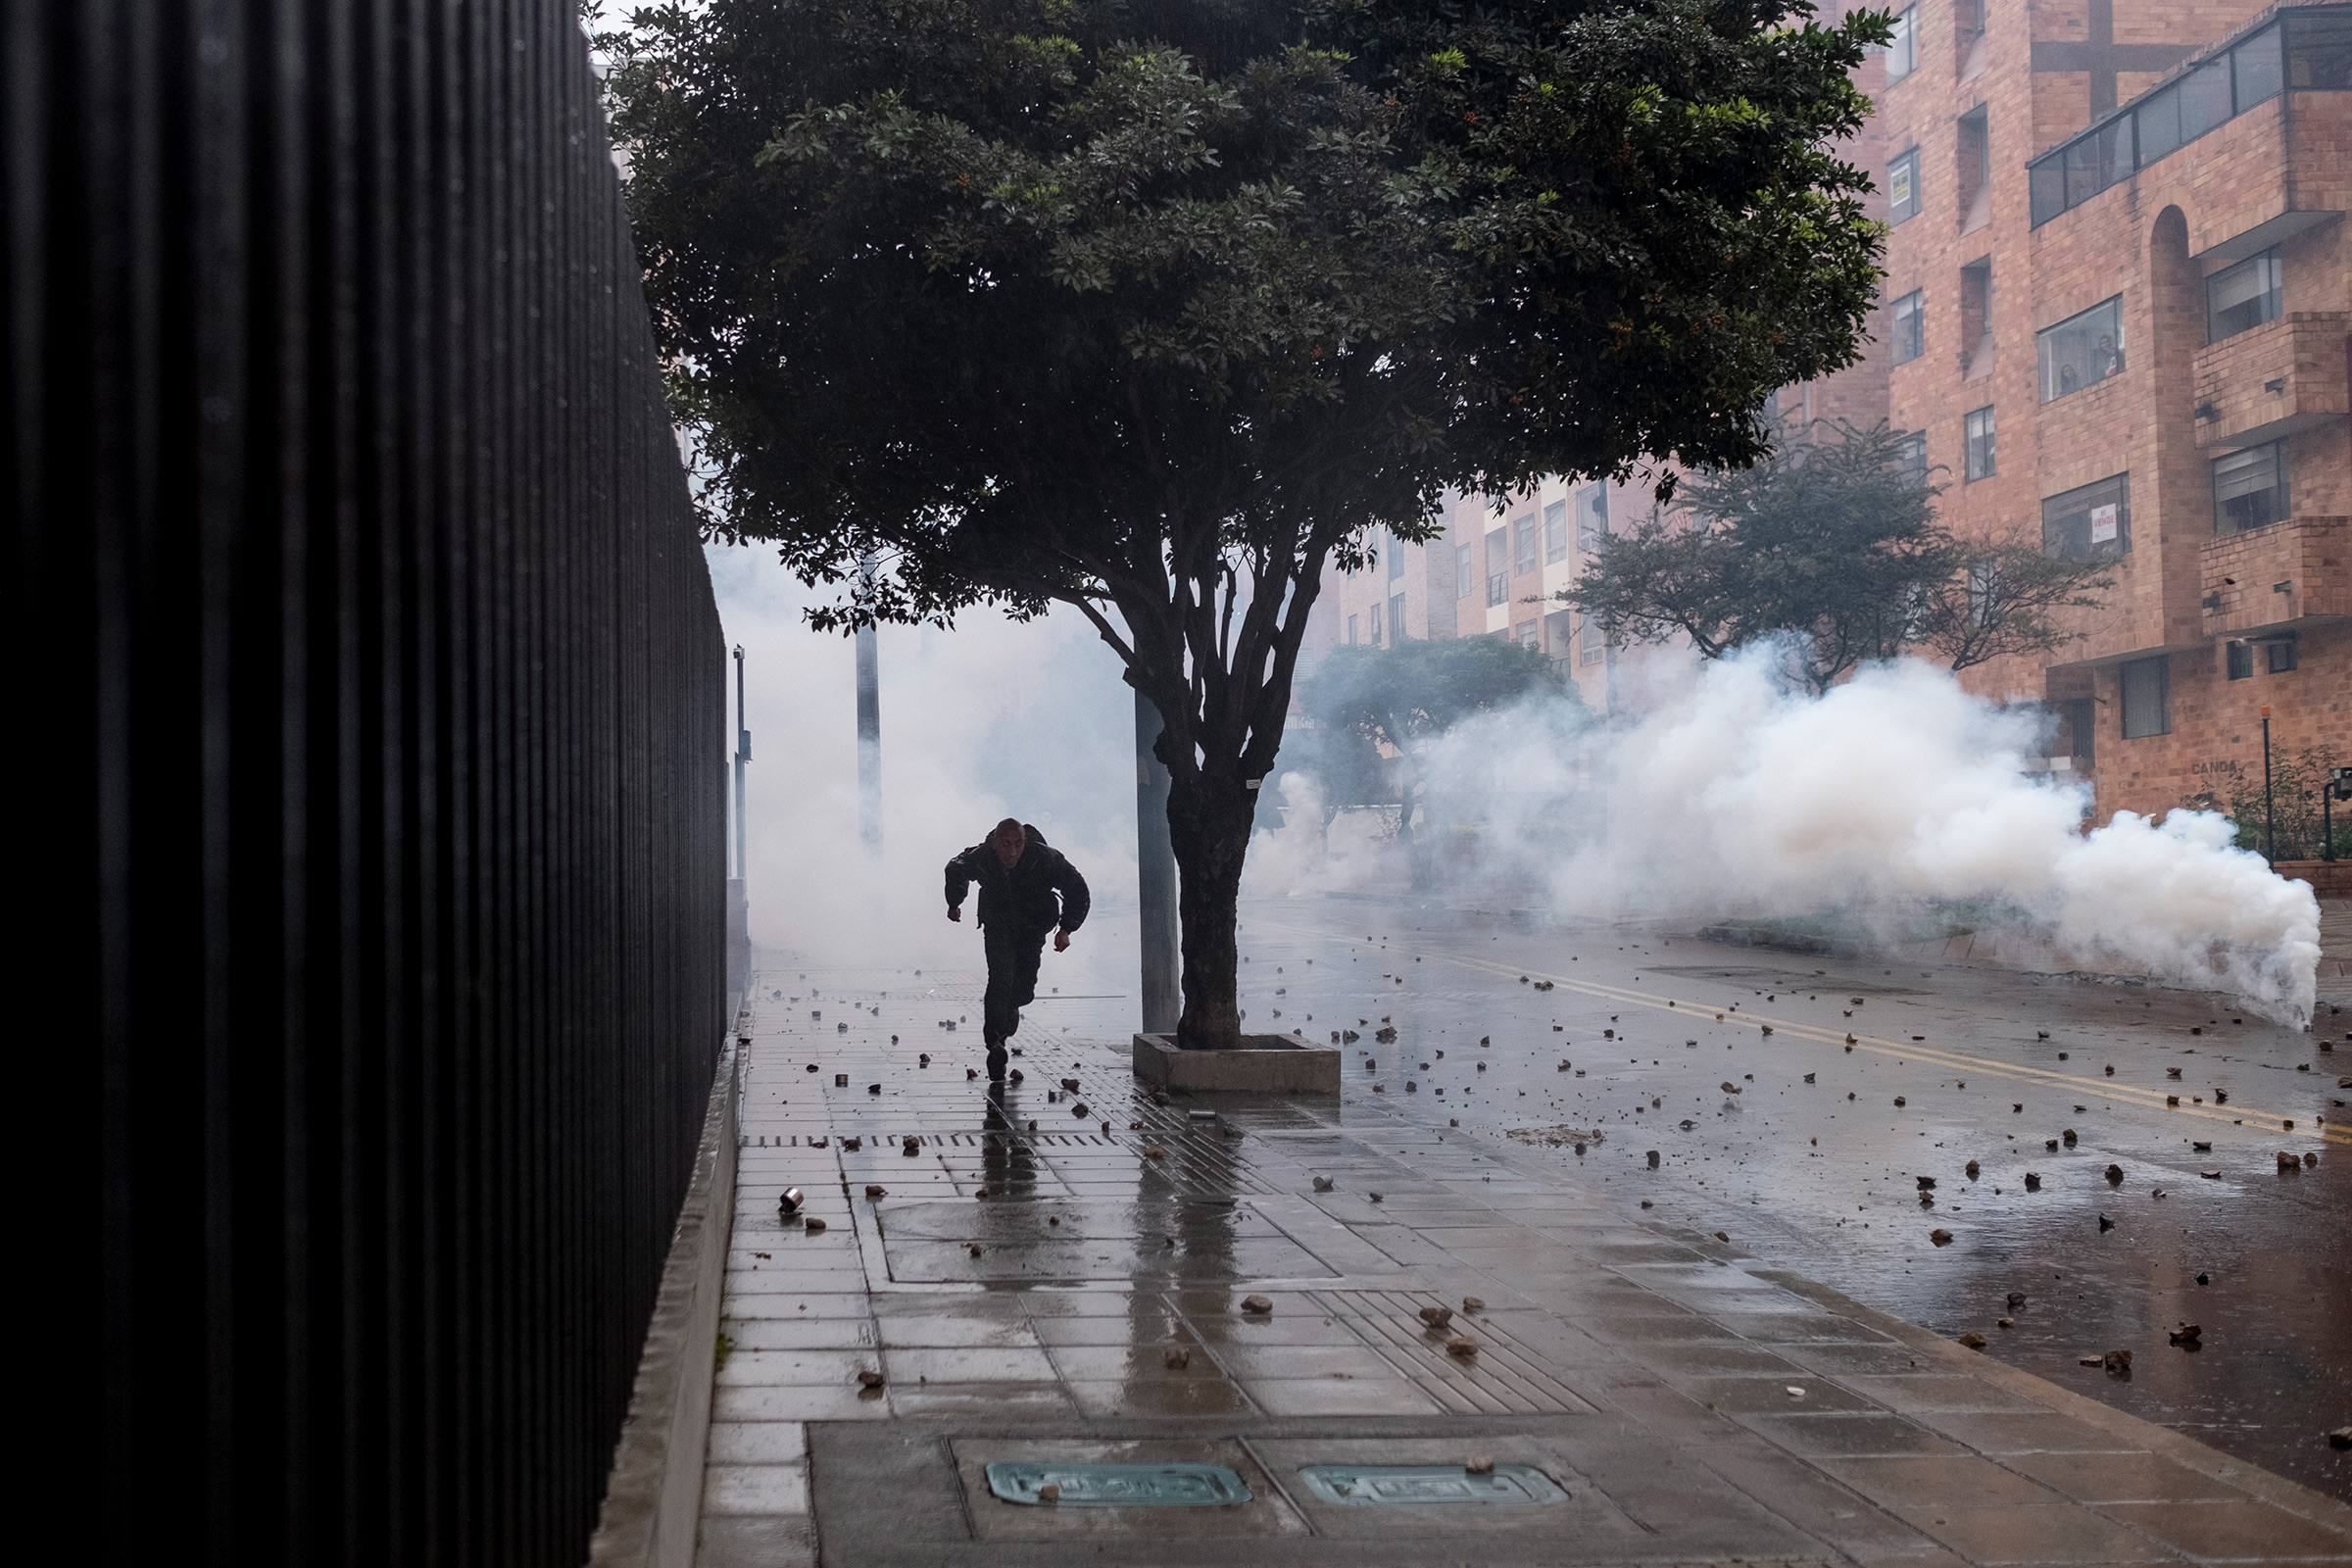 A protester flees tear gas used by the police in northern Bogotá on May 1. (Santiago Mesa—Reojo Colectivo)